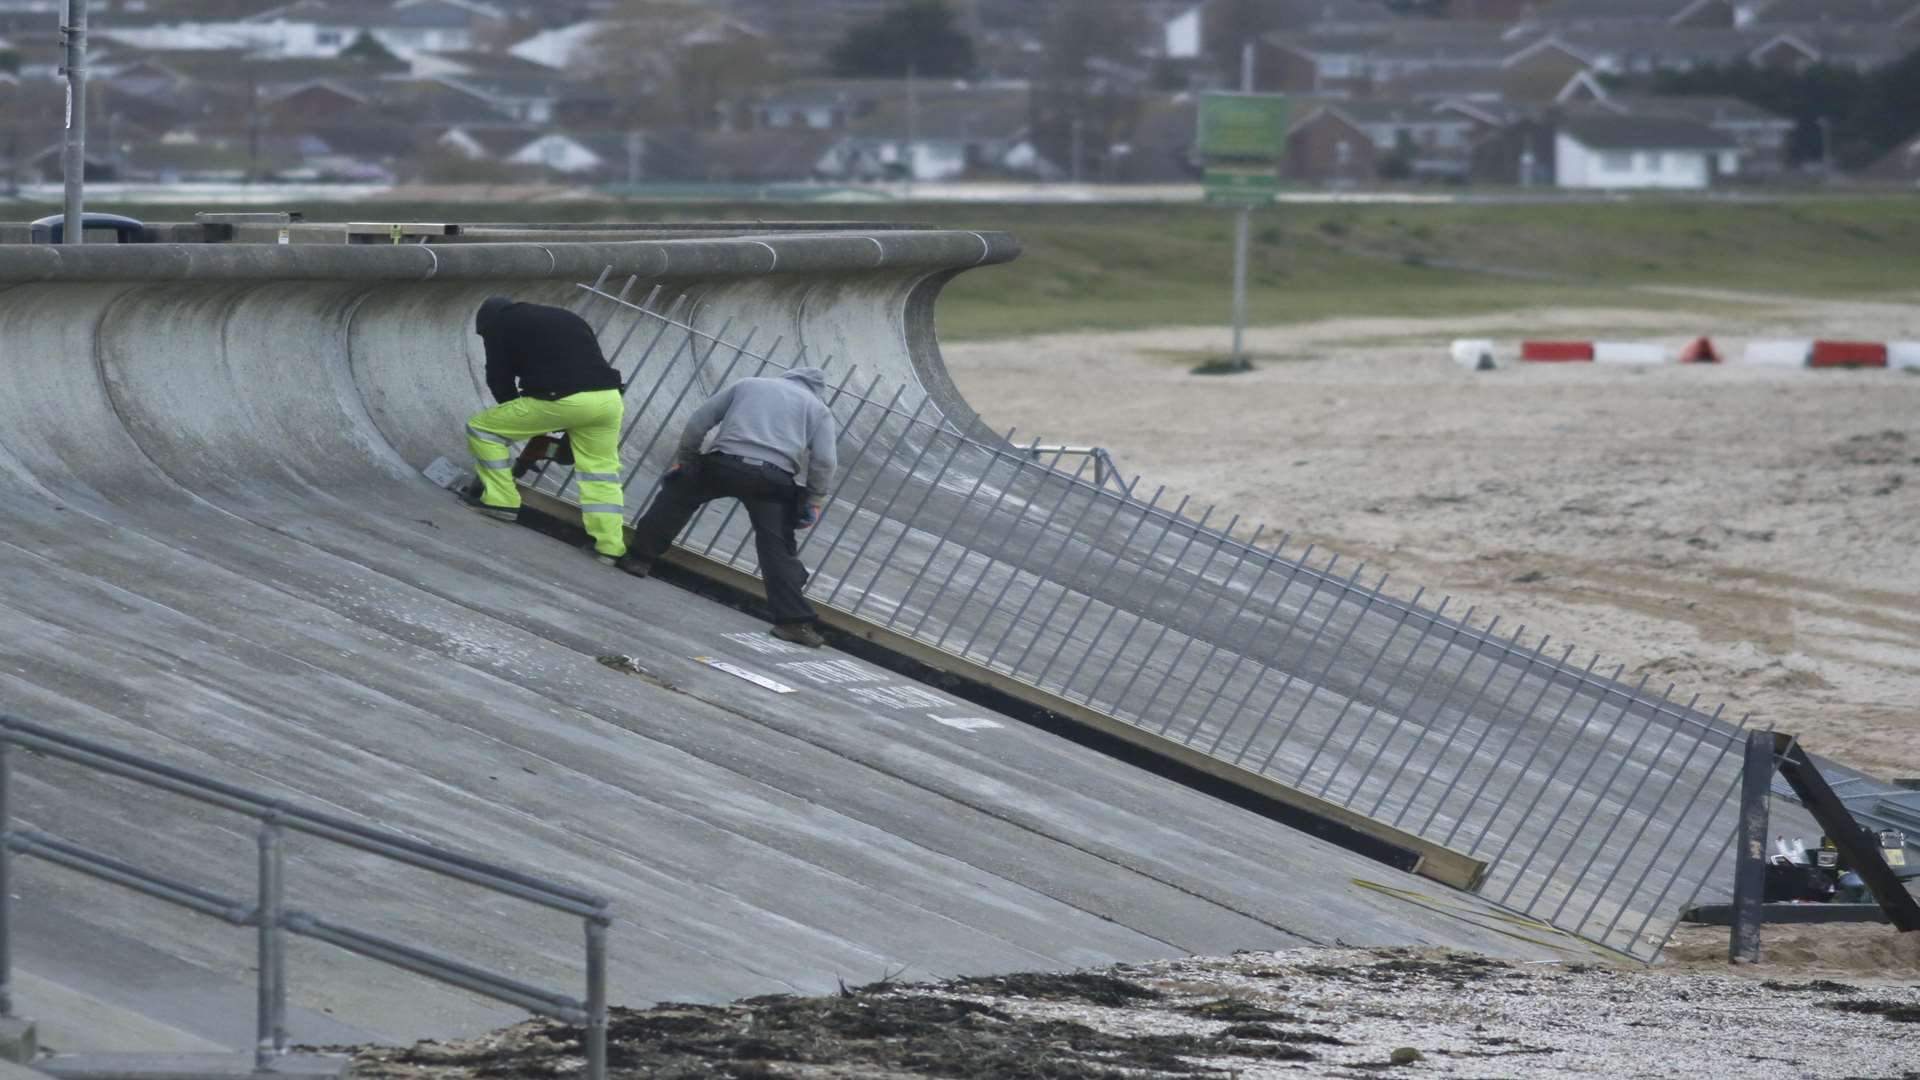 Railings being installed by Central Beach Holiday Park on Leysdown beach, Sheppey. Picture: LauraKay